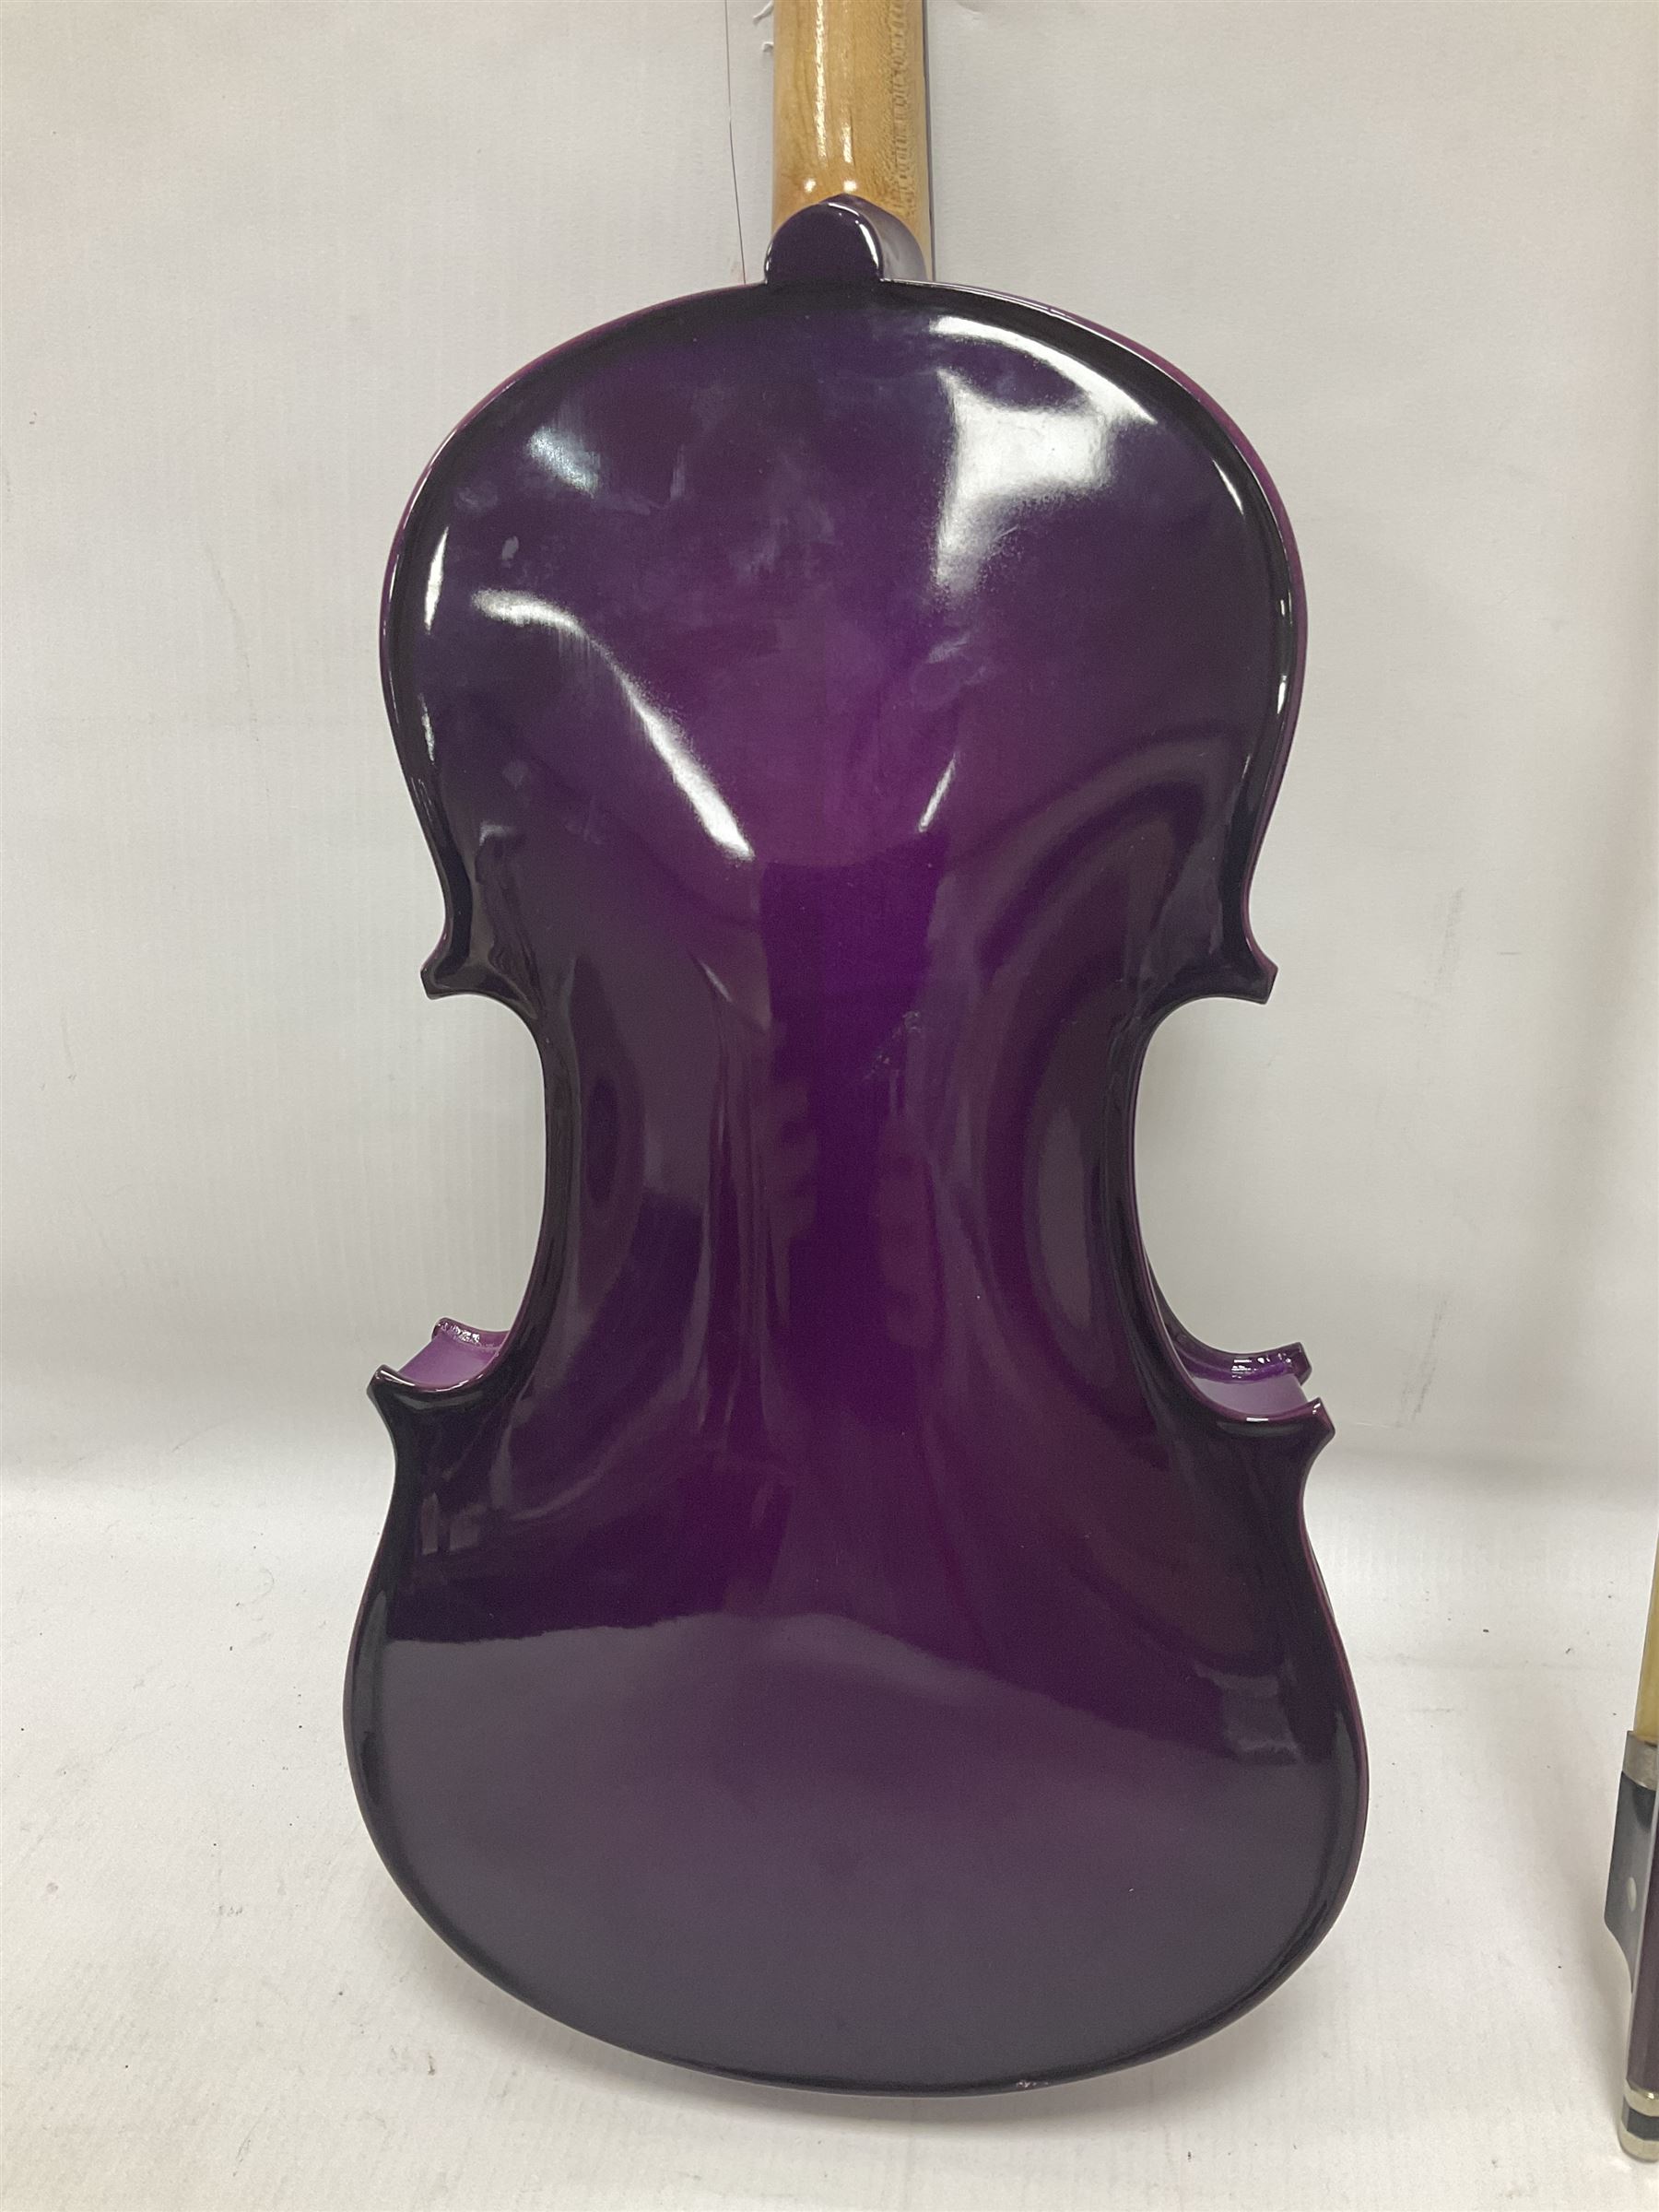 Intermusic 3/4 violin with a violet coloured solid wood body - Image 15 of 25